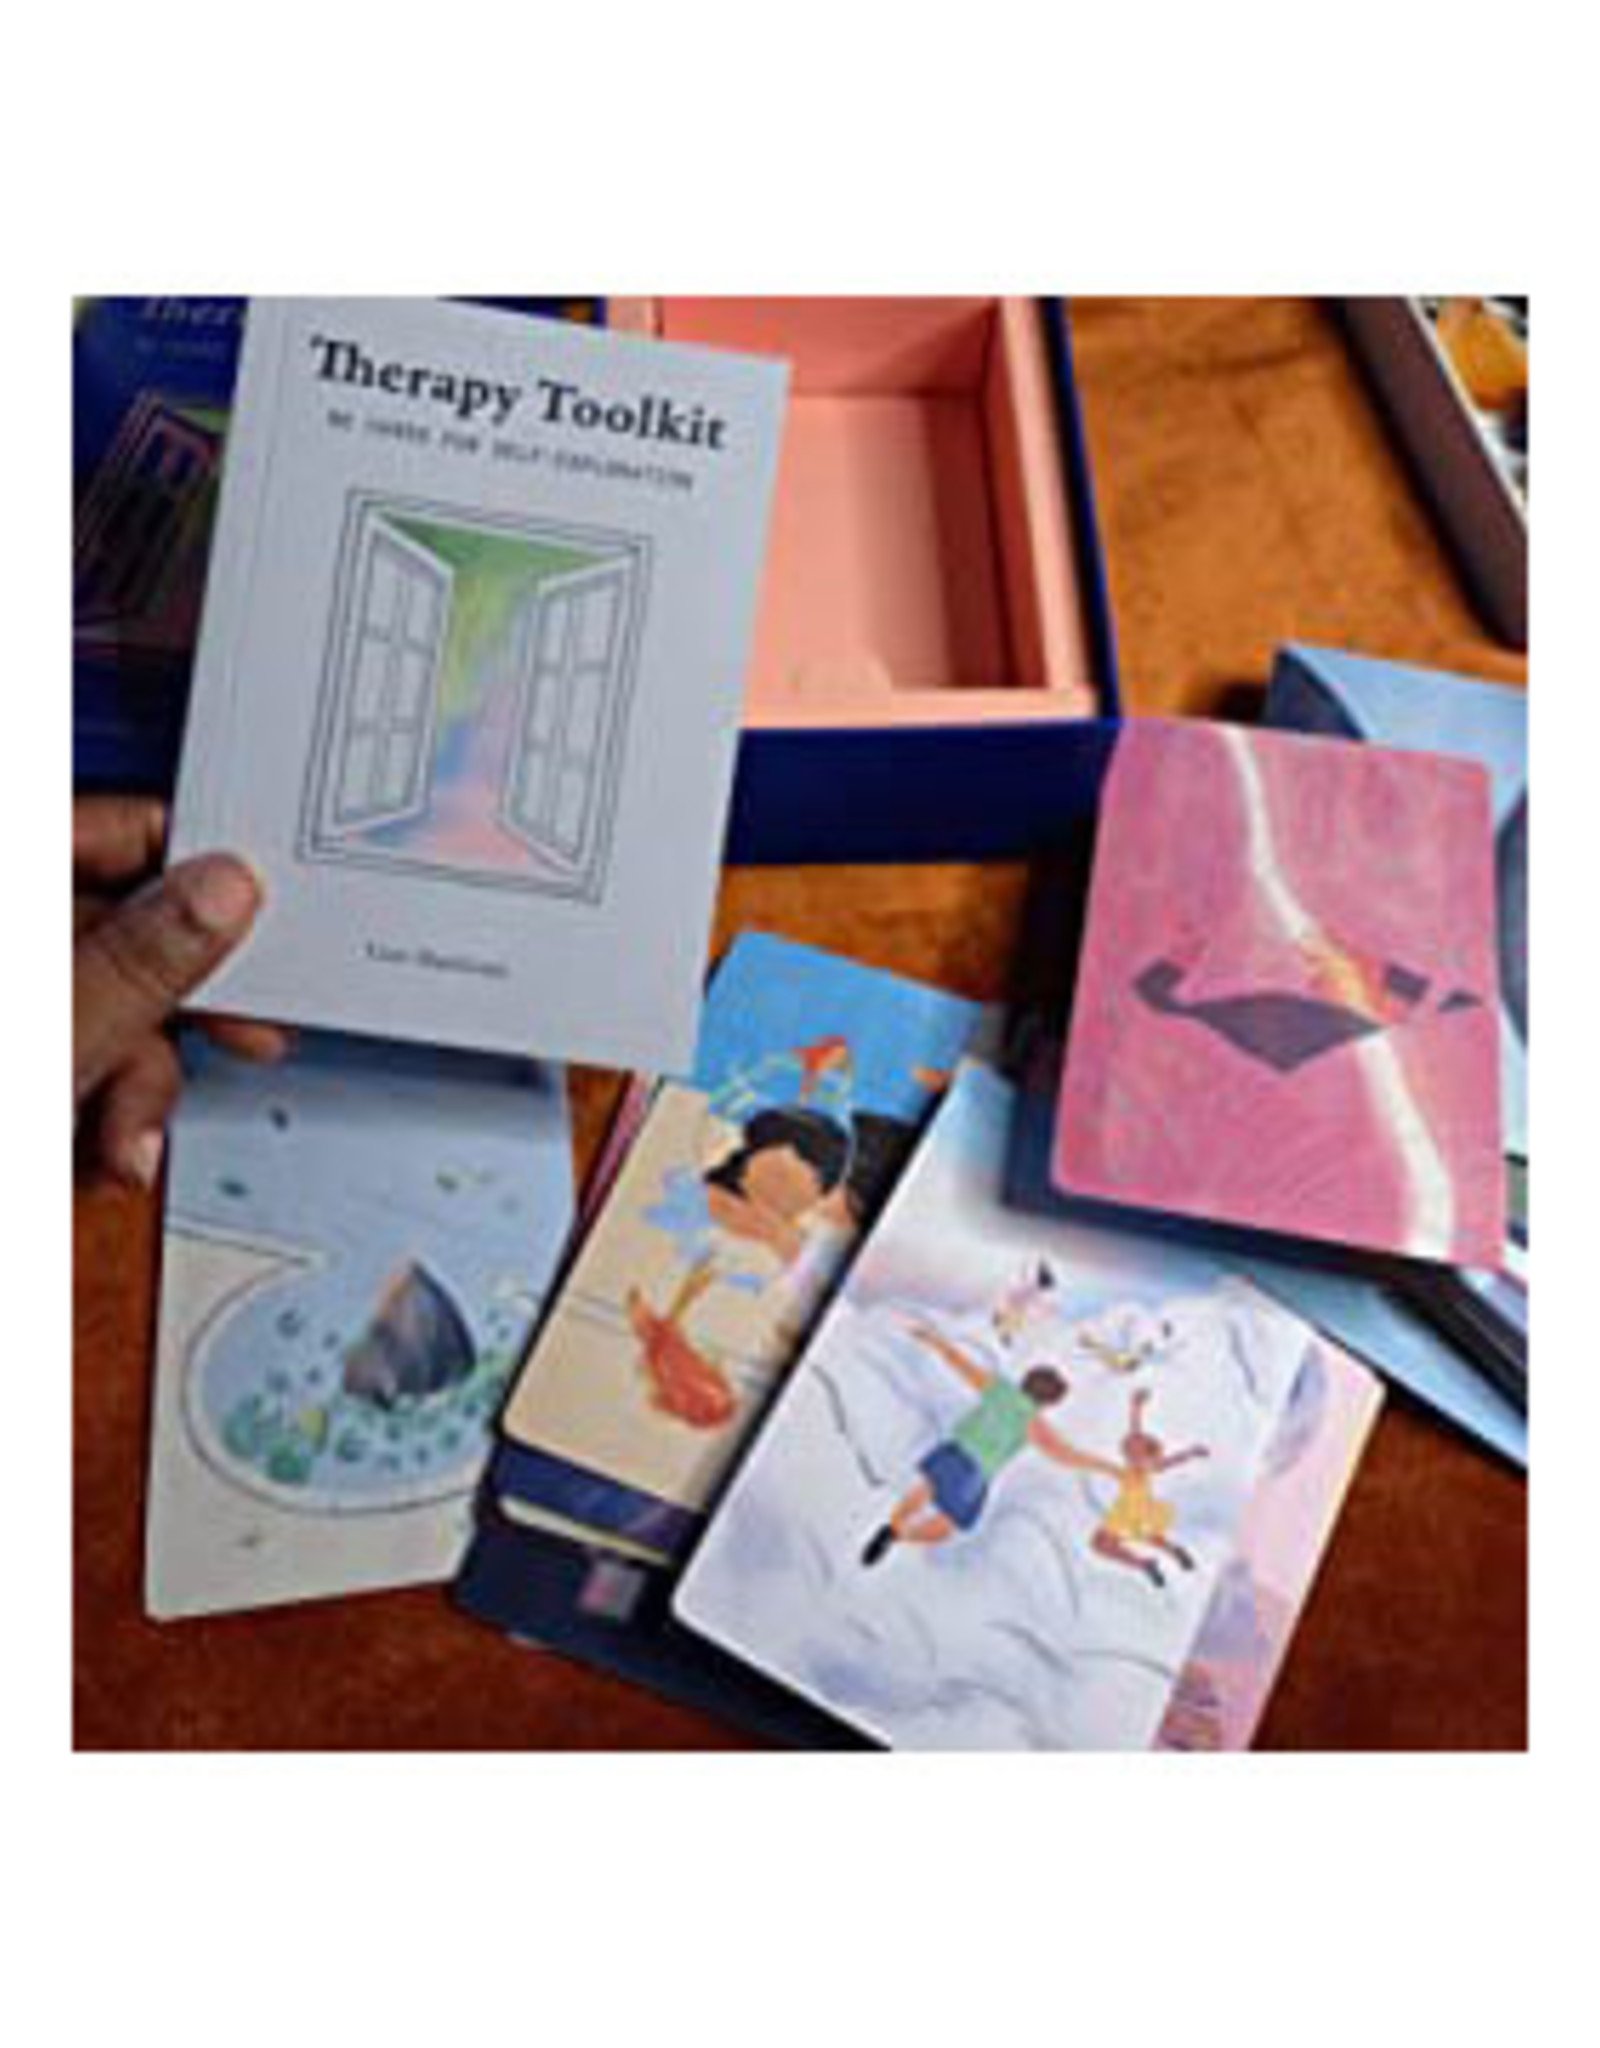 Therapy Toolkit: 60 Cards for Self-Exploration